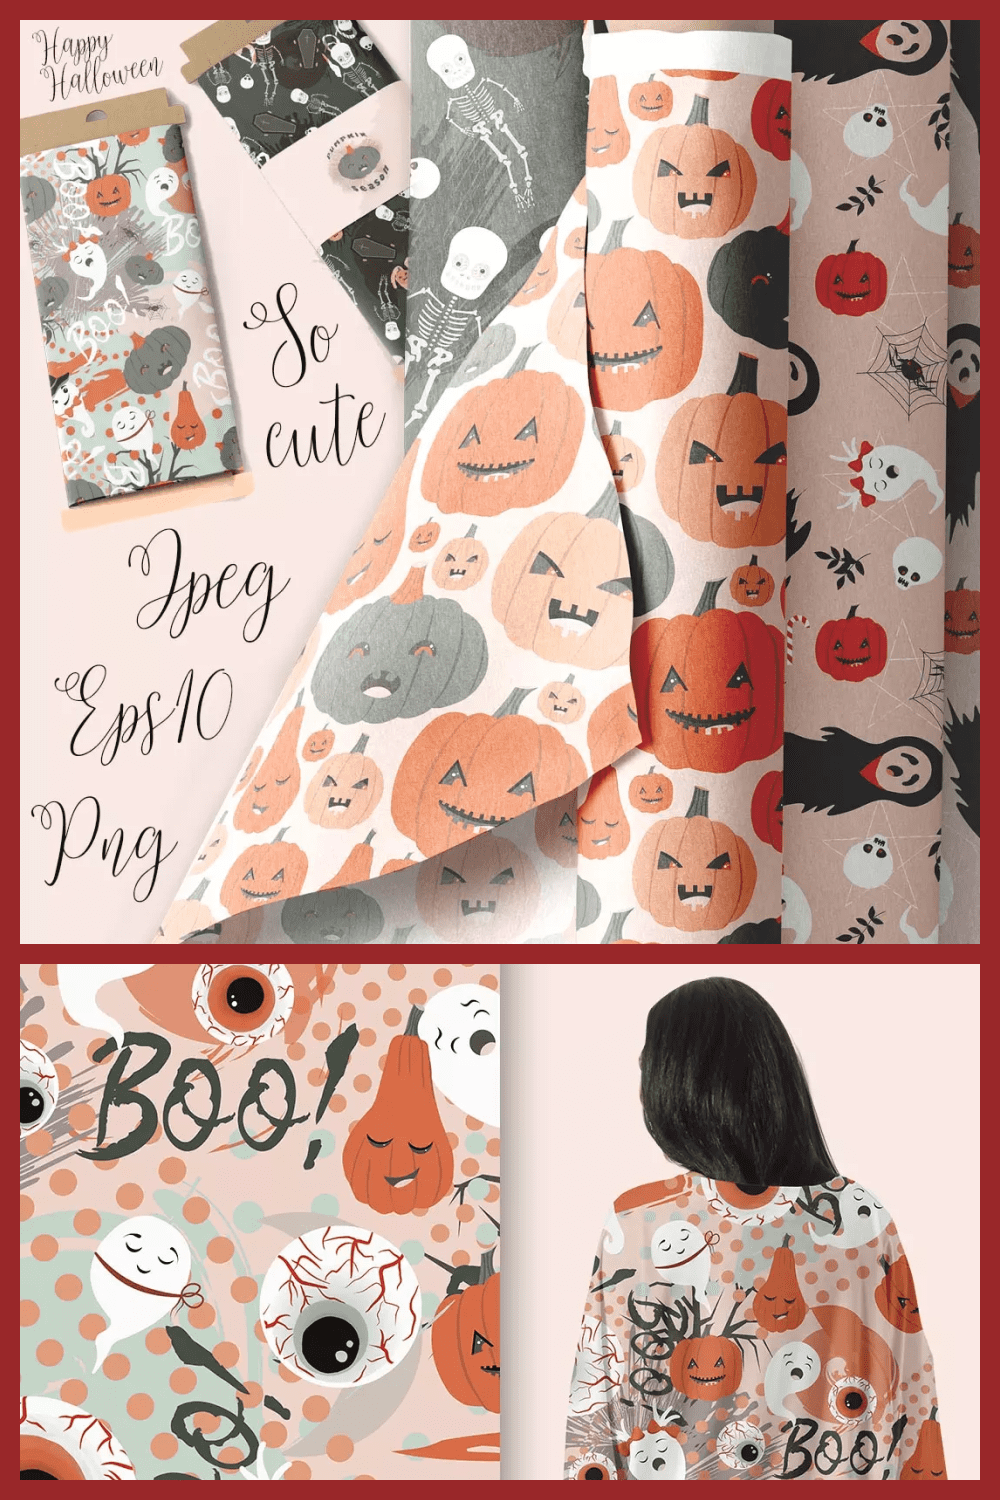 Wrapping paper with Halloweenas patterns with pumpkins and ghosts.